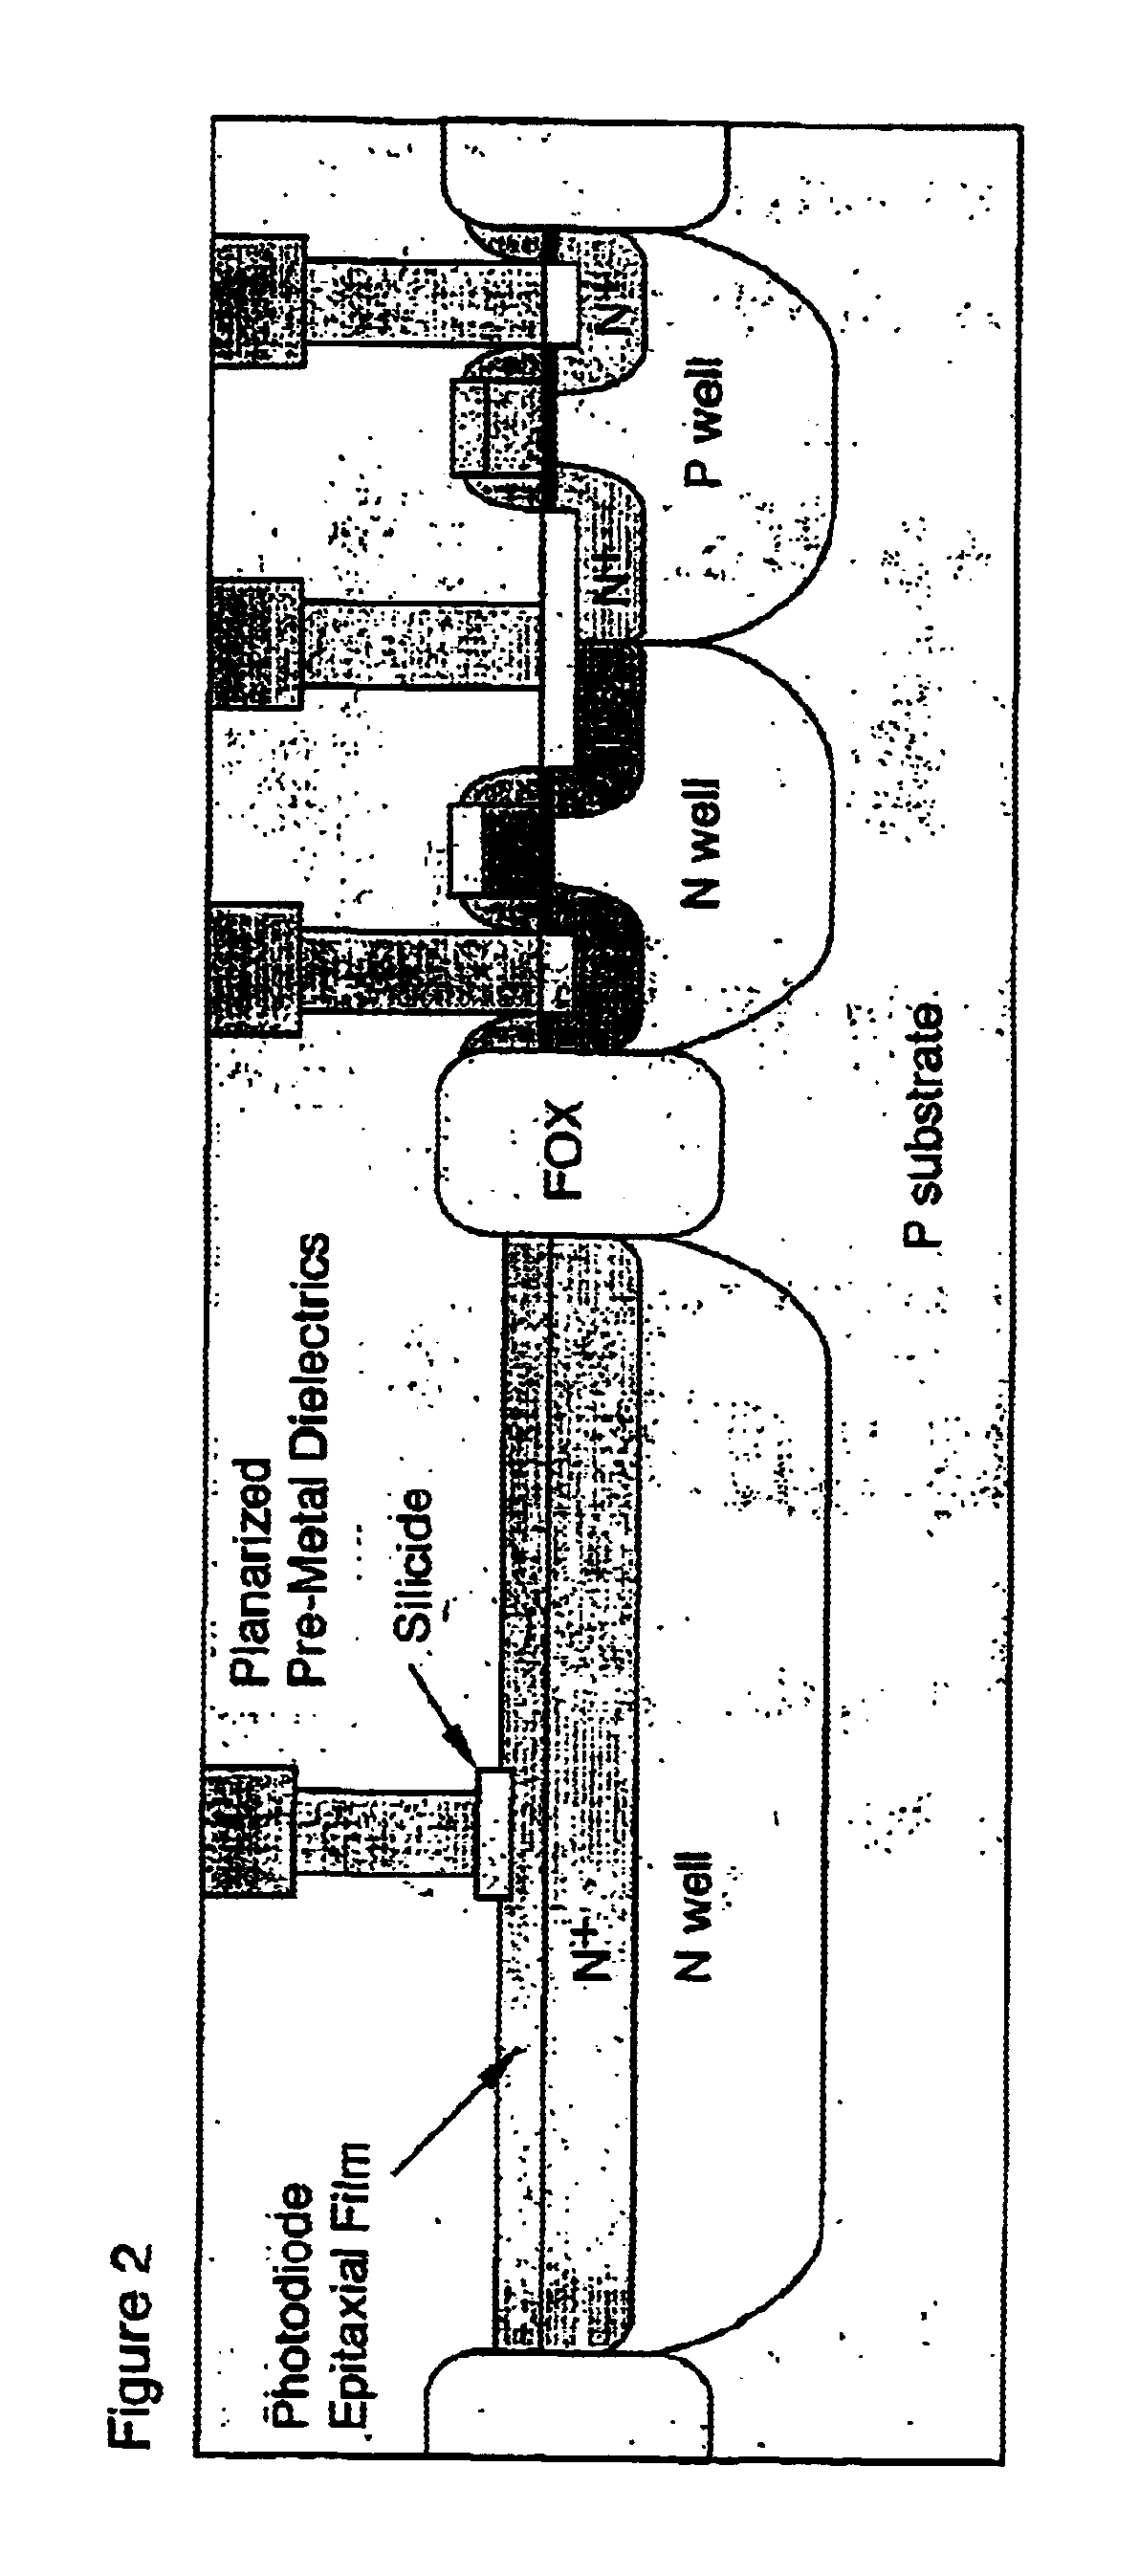 Method of fabricating heterojunction photodiodes integrated with CMOS